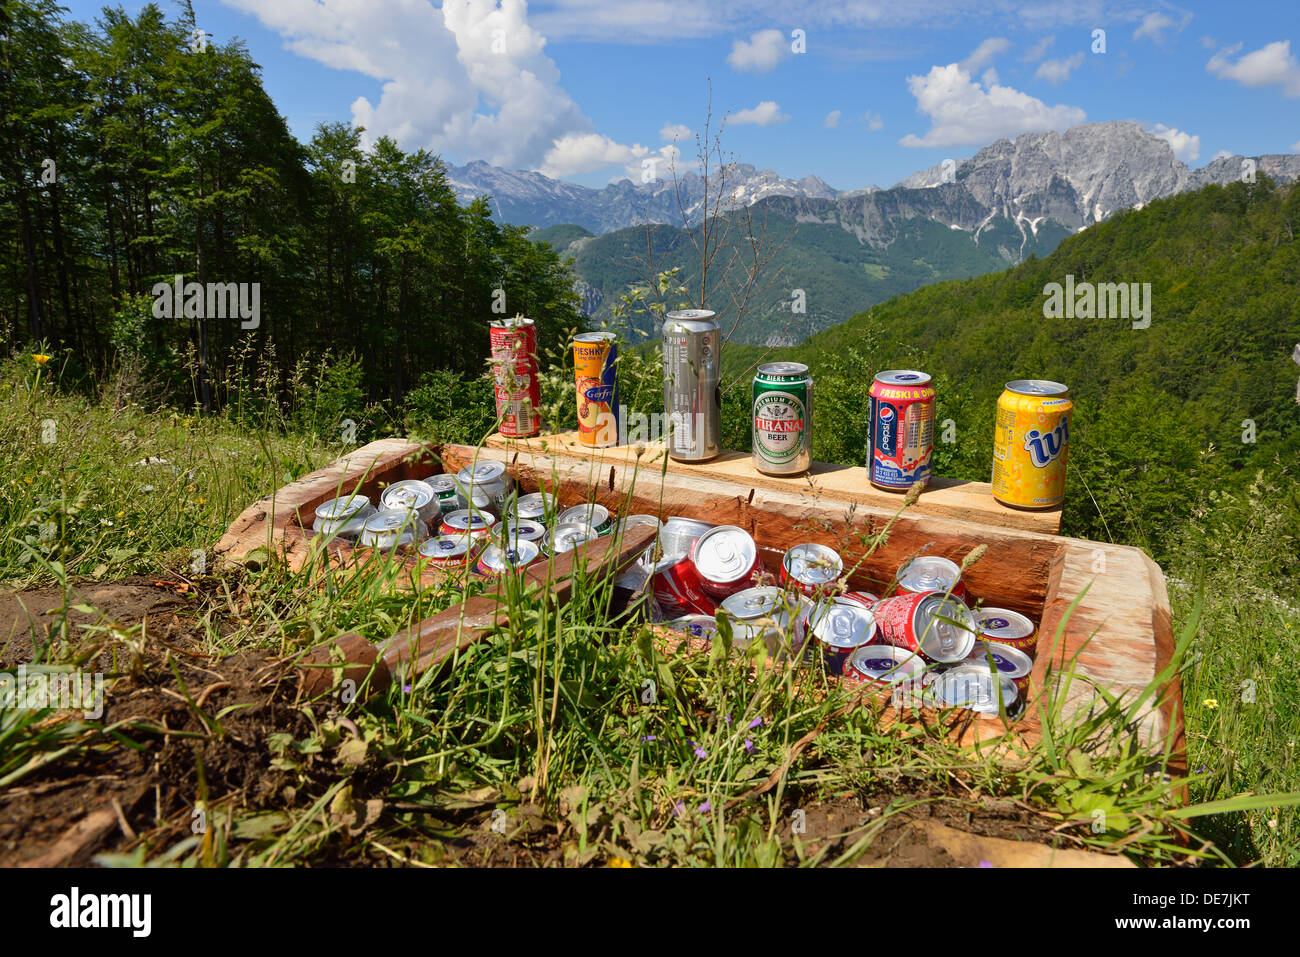 Albania, Balkans, Beer and softdinks in cooler with mountains in background Stock Photo